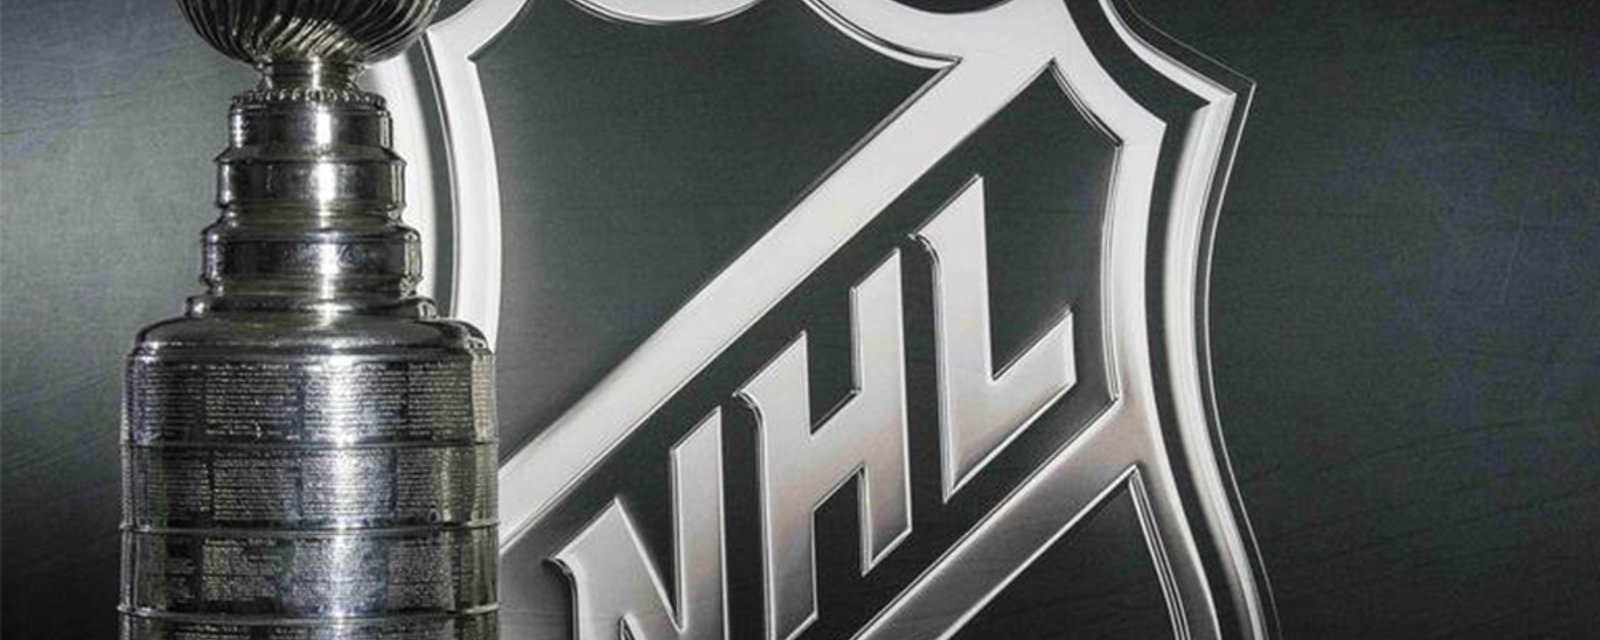 Report: NHL considering a return to action, without fans, in August.